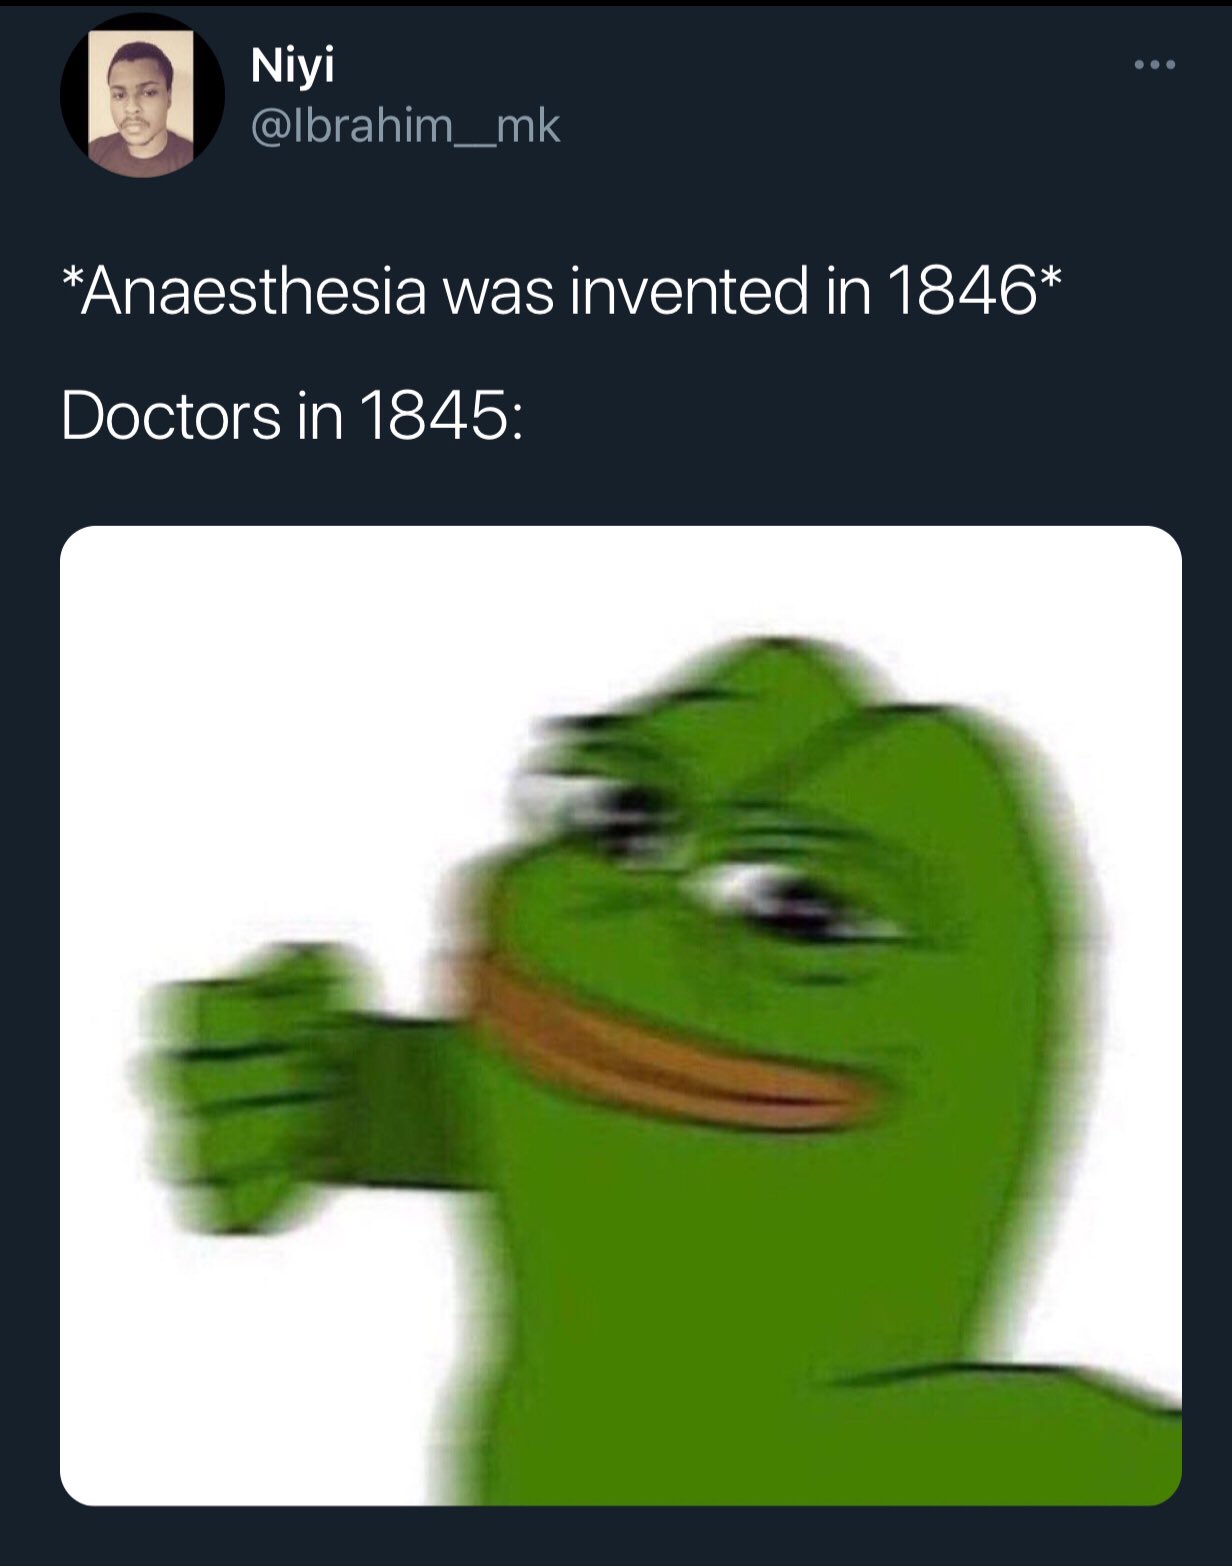 funny twitter jokes - Anaesthesia was invented in 1846 Doctors in 1845